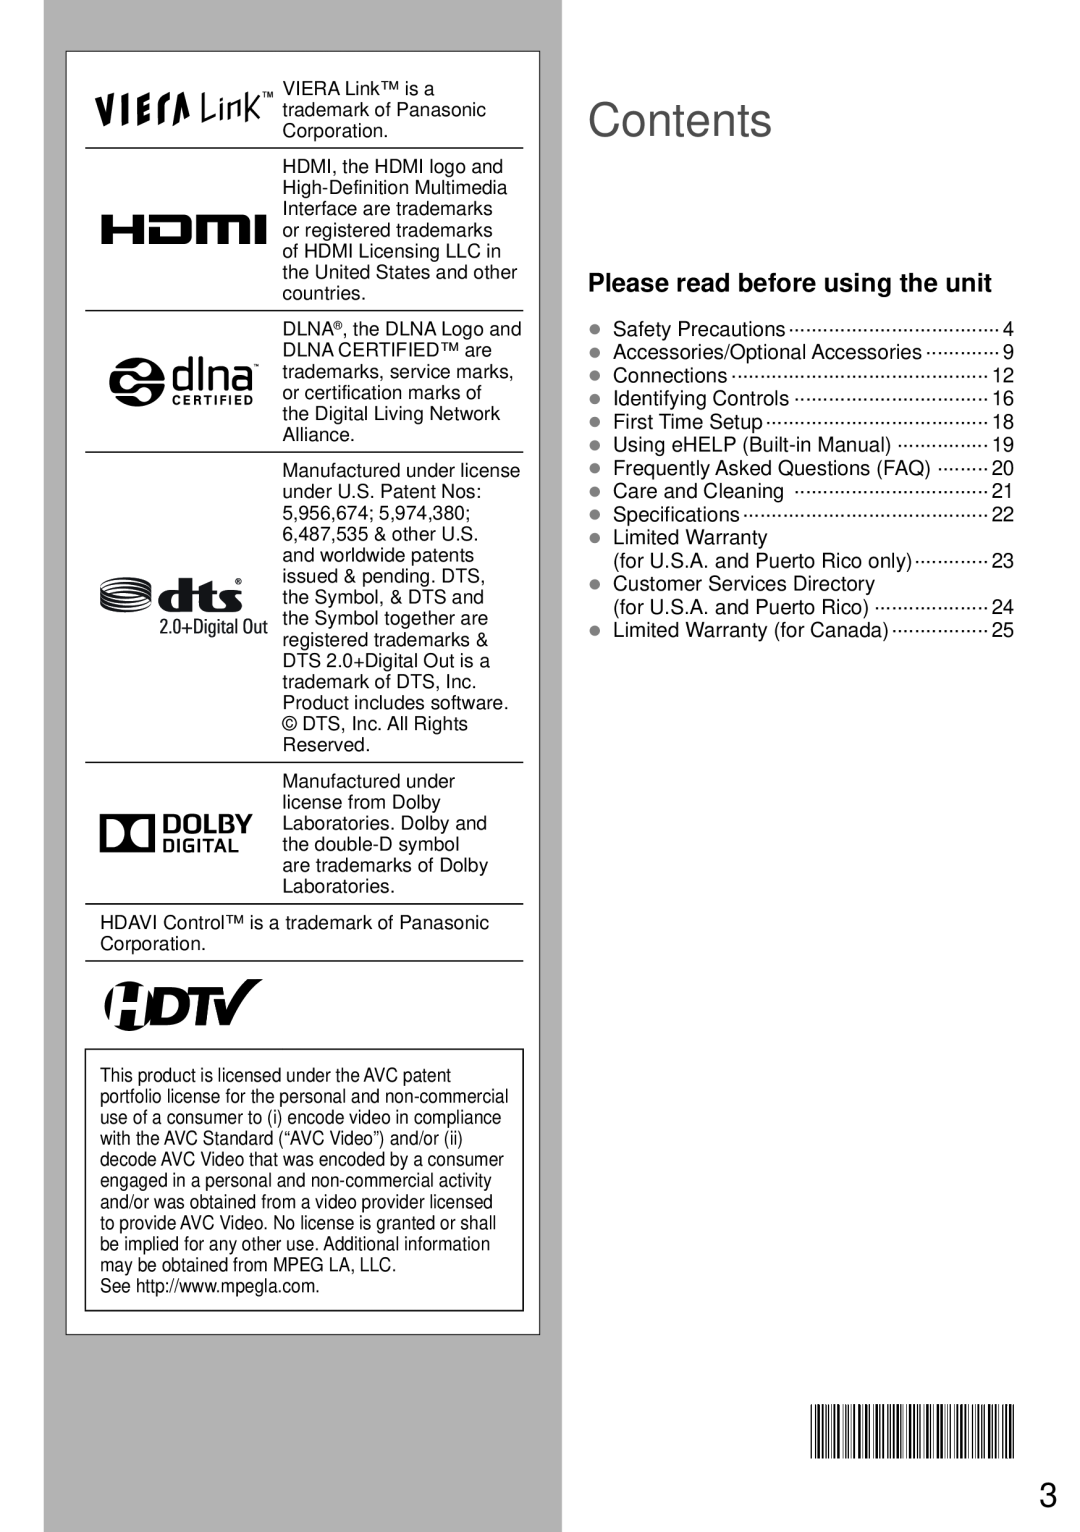 Panasonic TC-65PS64, TC-50PS64 owner manual Please read before using the unit, Contents 